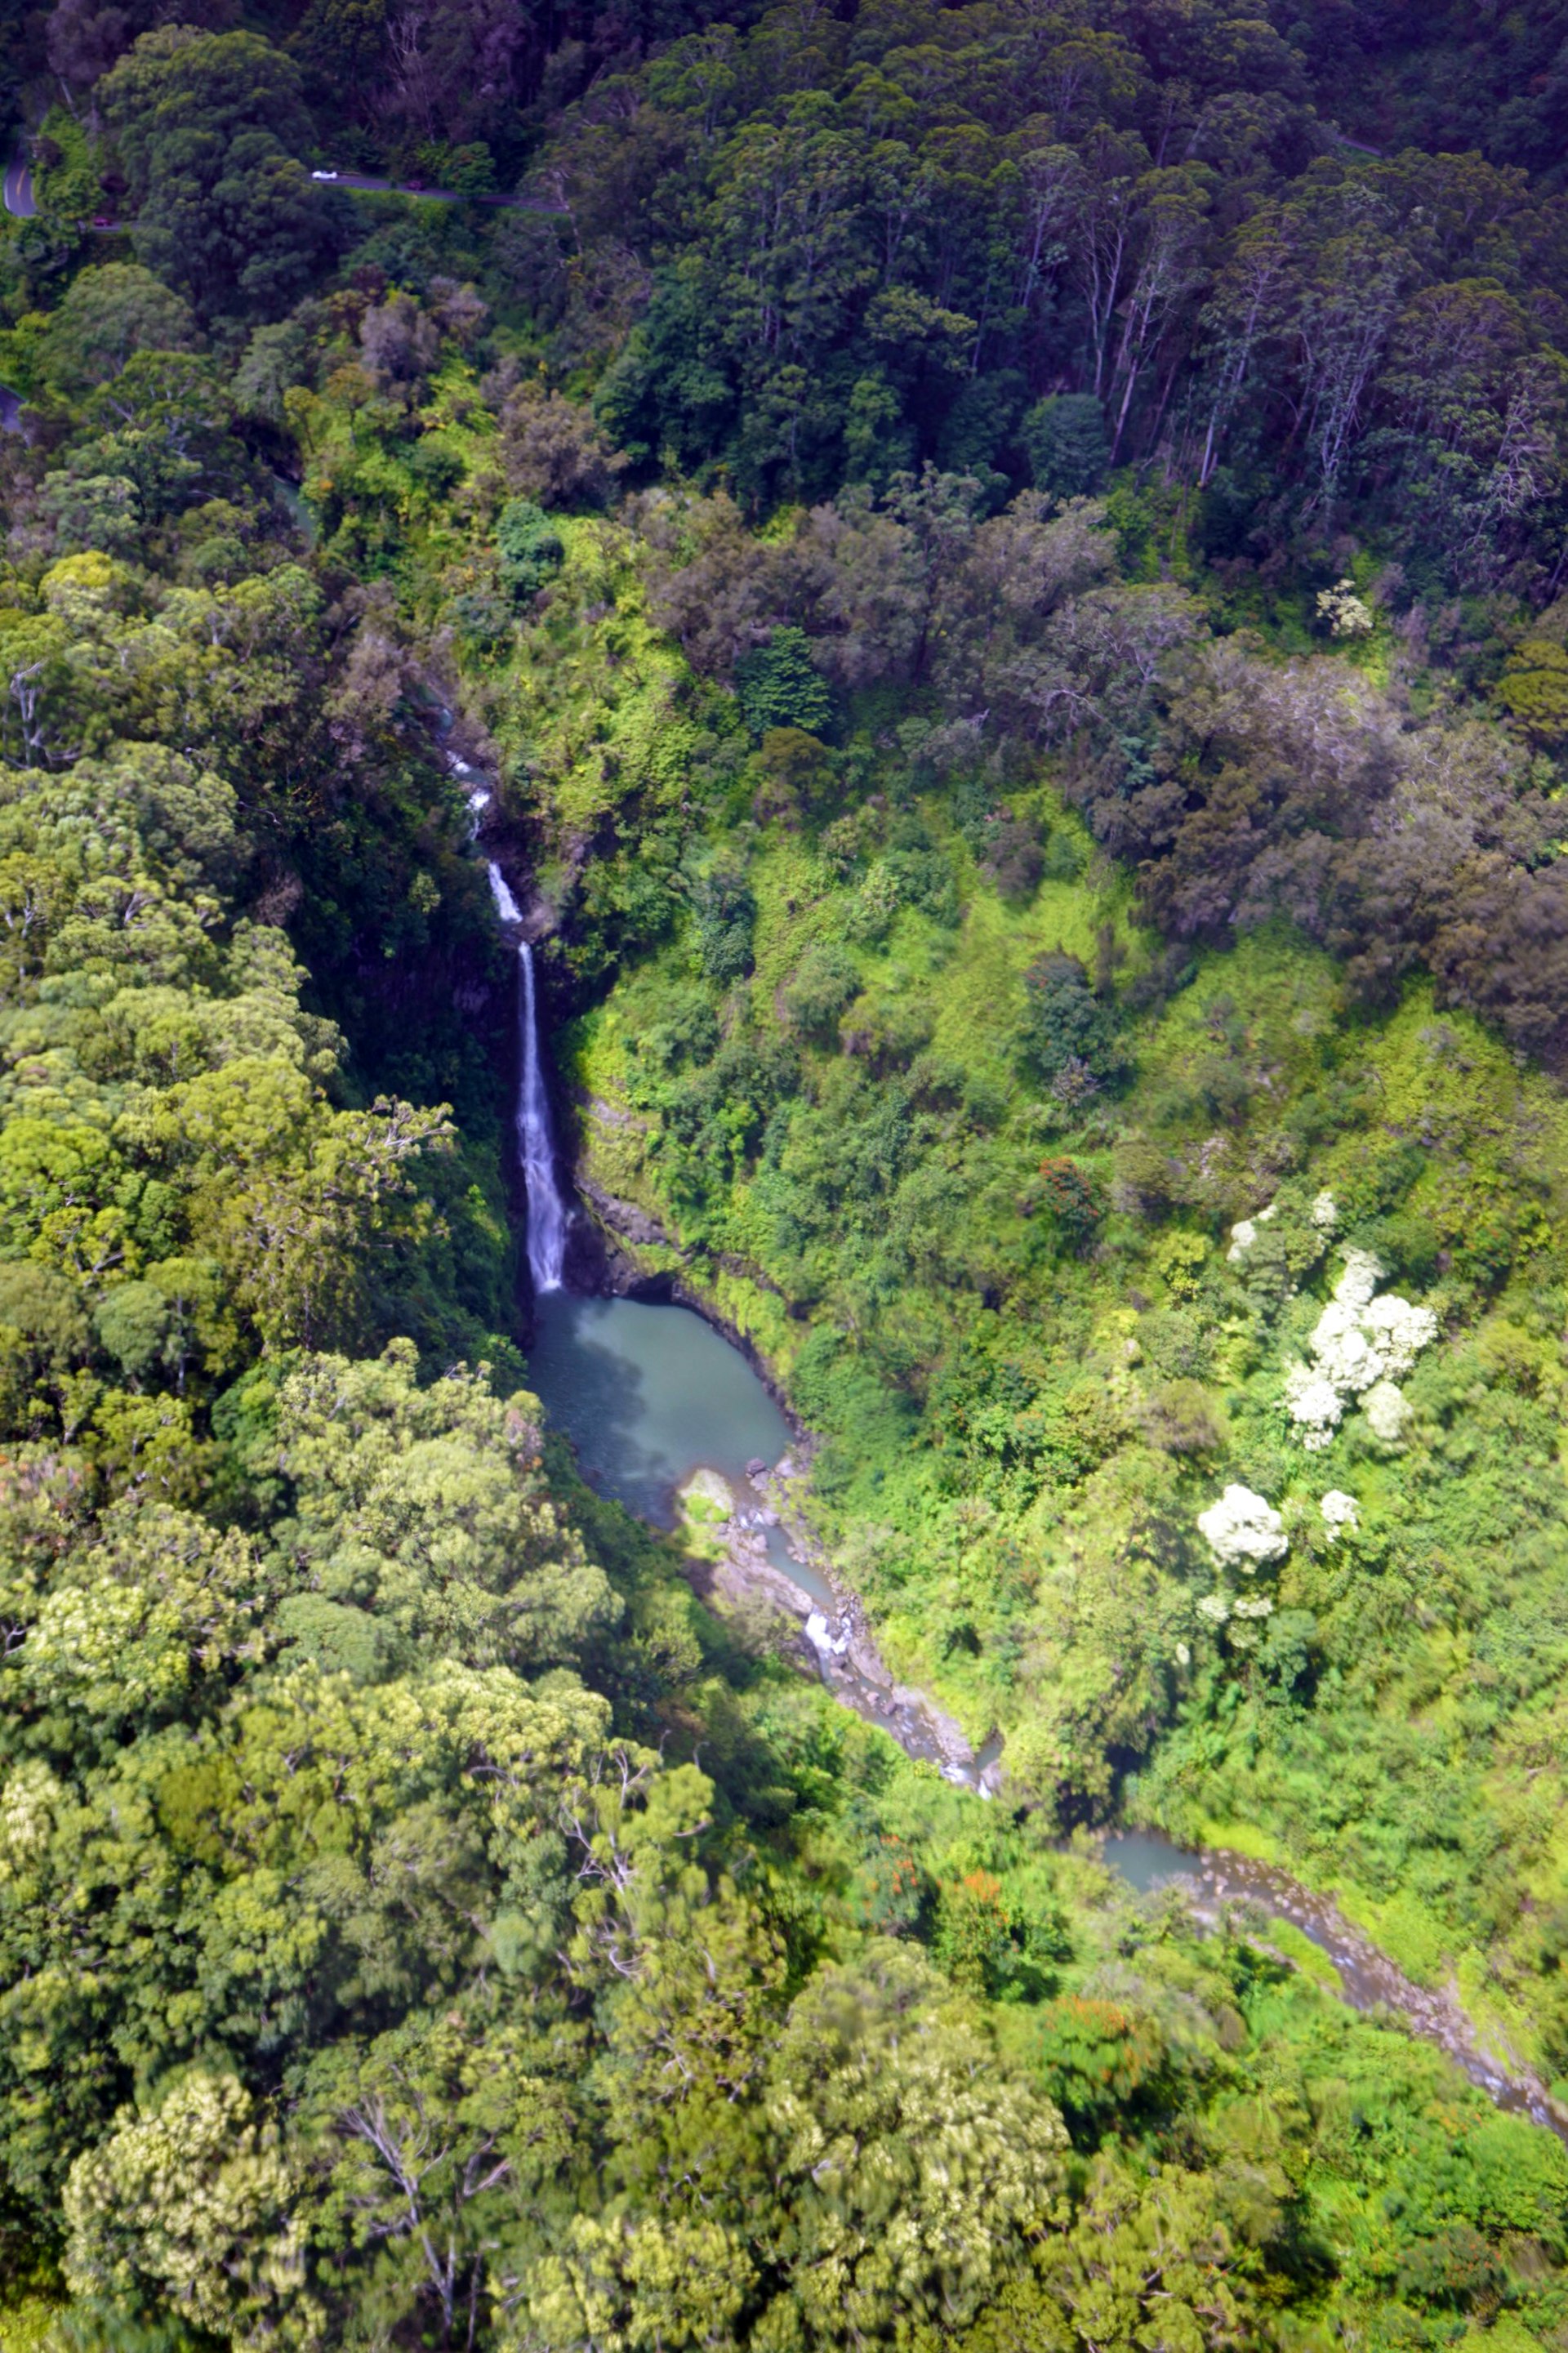 Looking down from a helicopter at the Hana rainforest and a large waterfall pouring into a lagoon; Maui sites without tourists